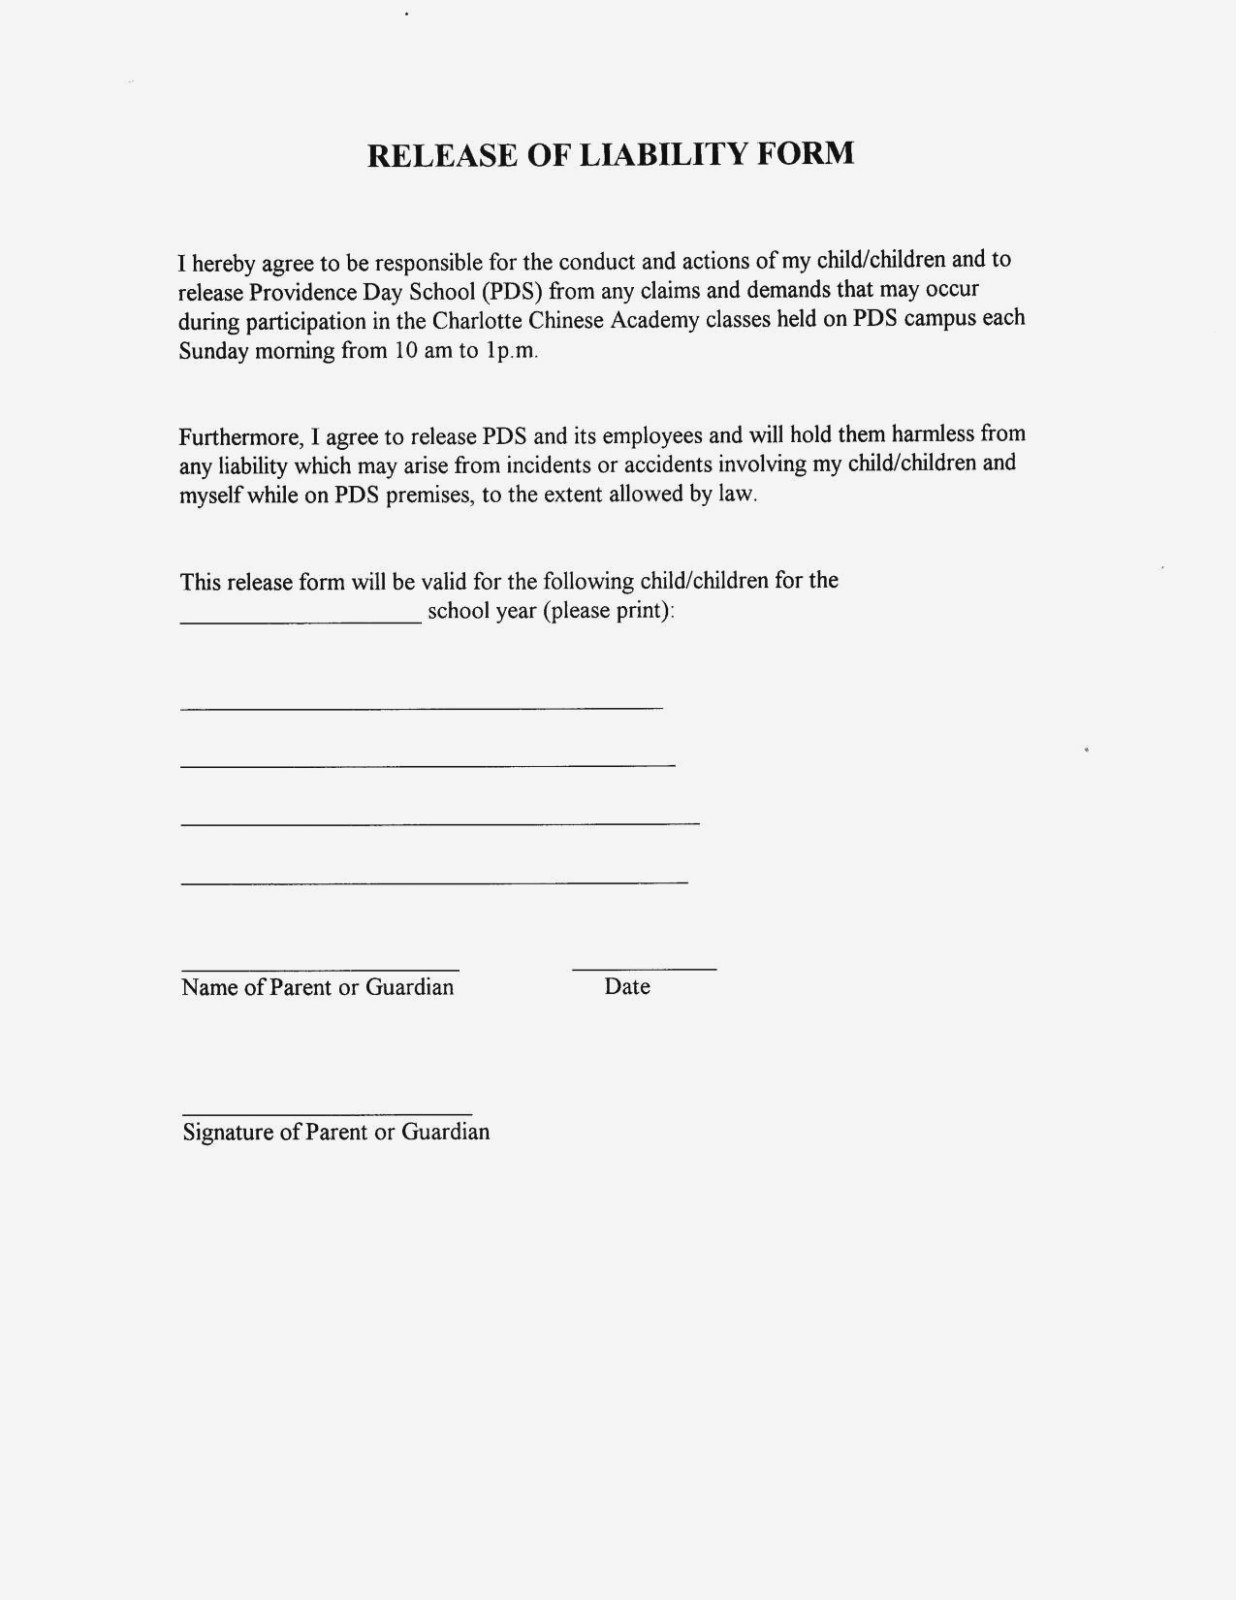 Master Risk Participation Agreement Template Awesome Eur Lex for Master Risk Participation Agreement Template